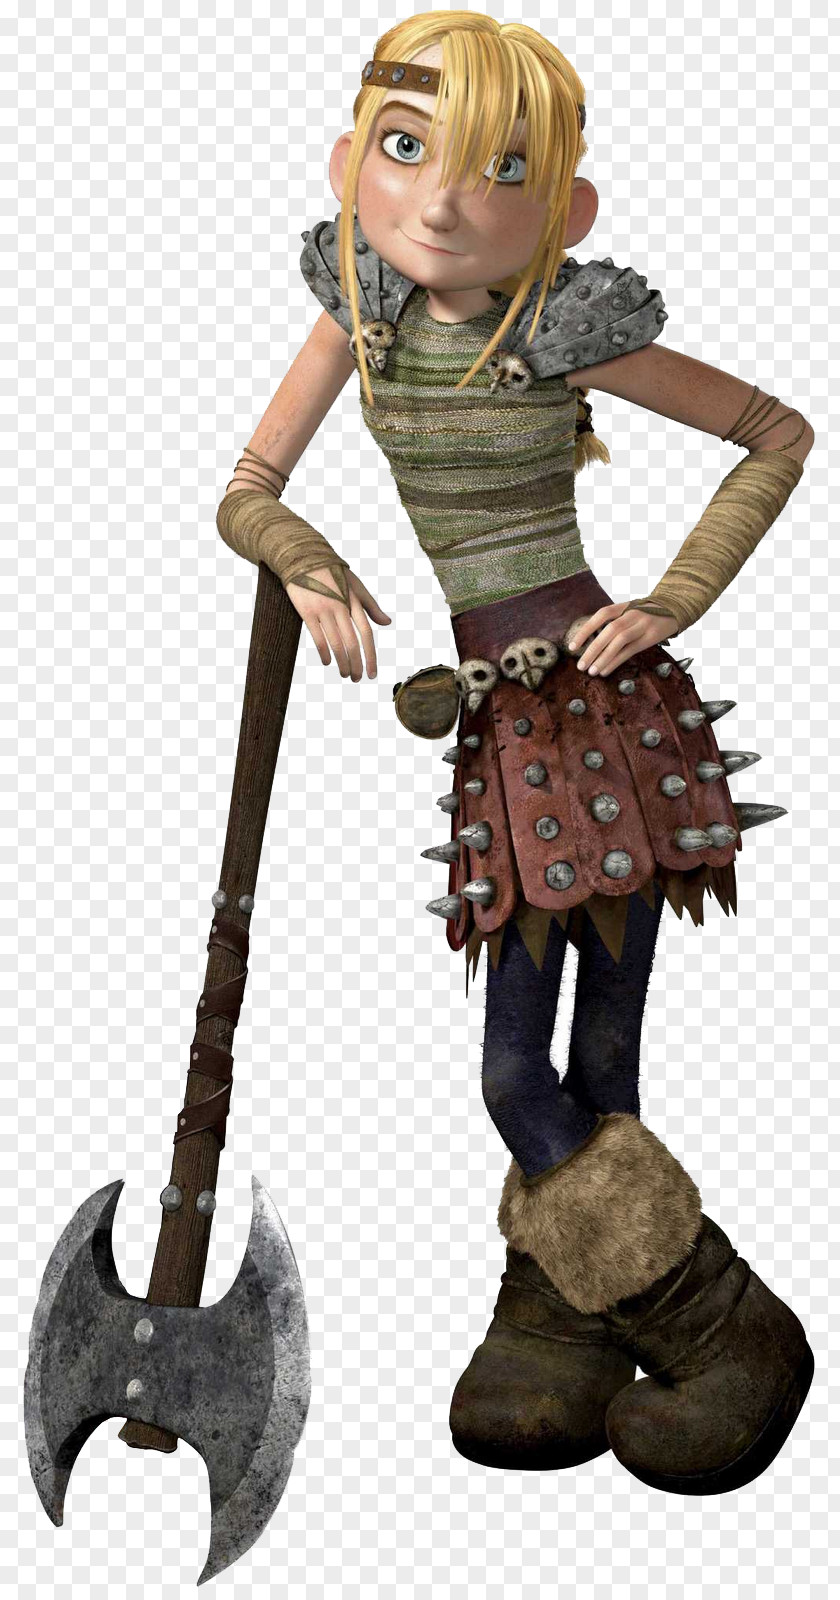 Your How To Train Dragon Astrid Ruffnut Hiccup Horrendous Haddock III Tuffnut PNG